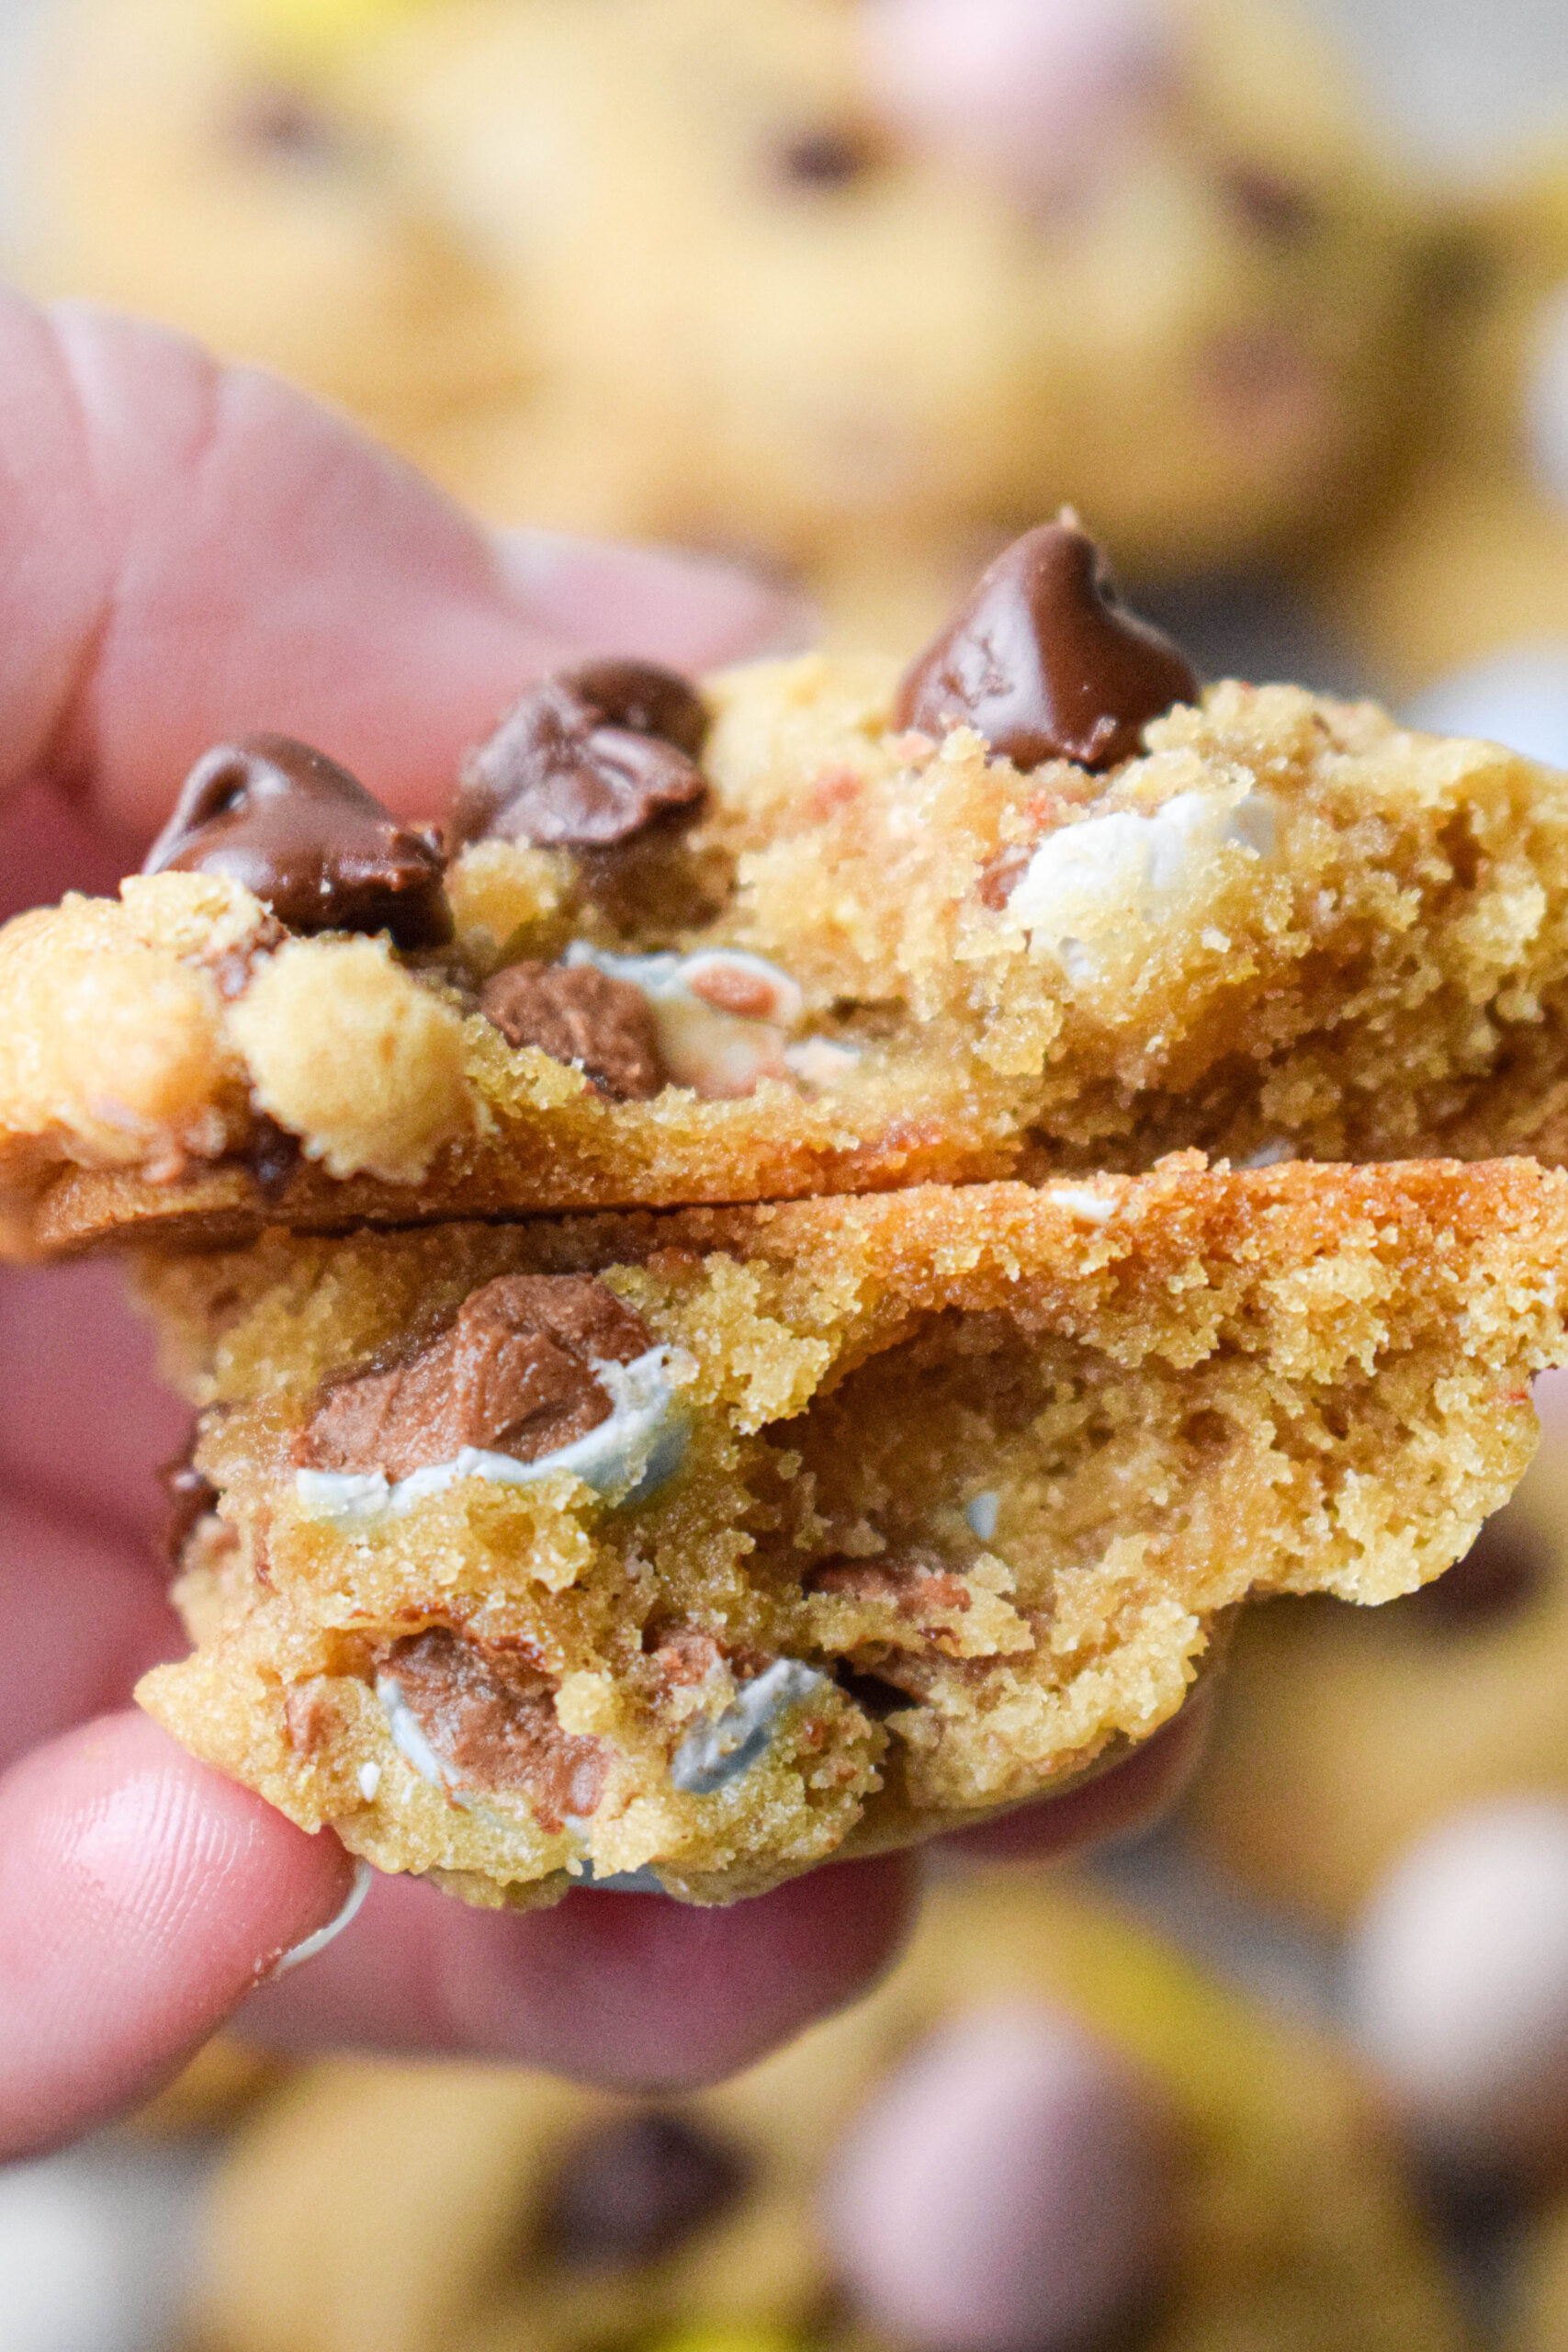 Inside view of the mini egg and chocolate chip Easter cookies 